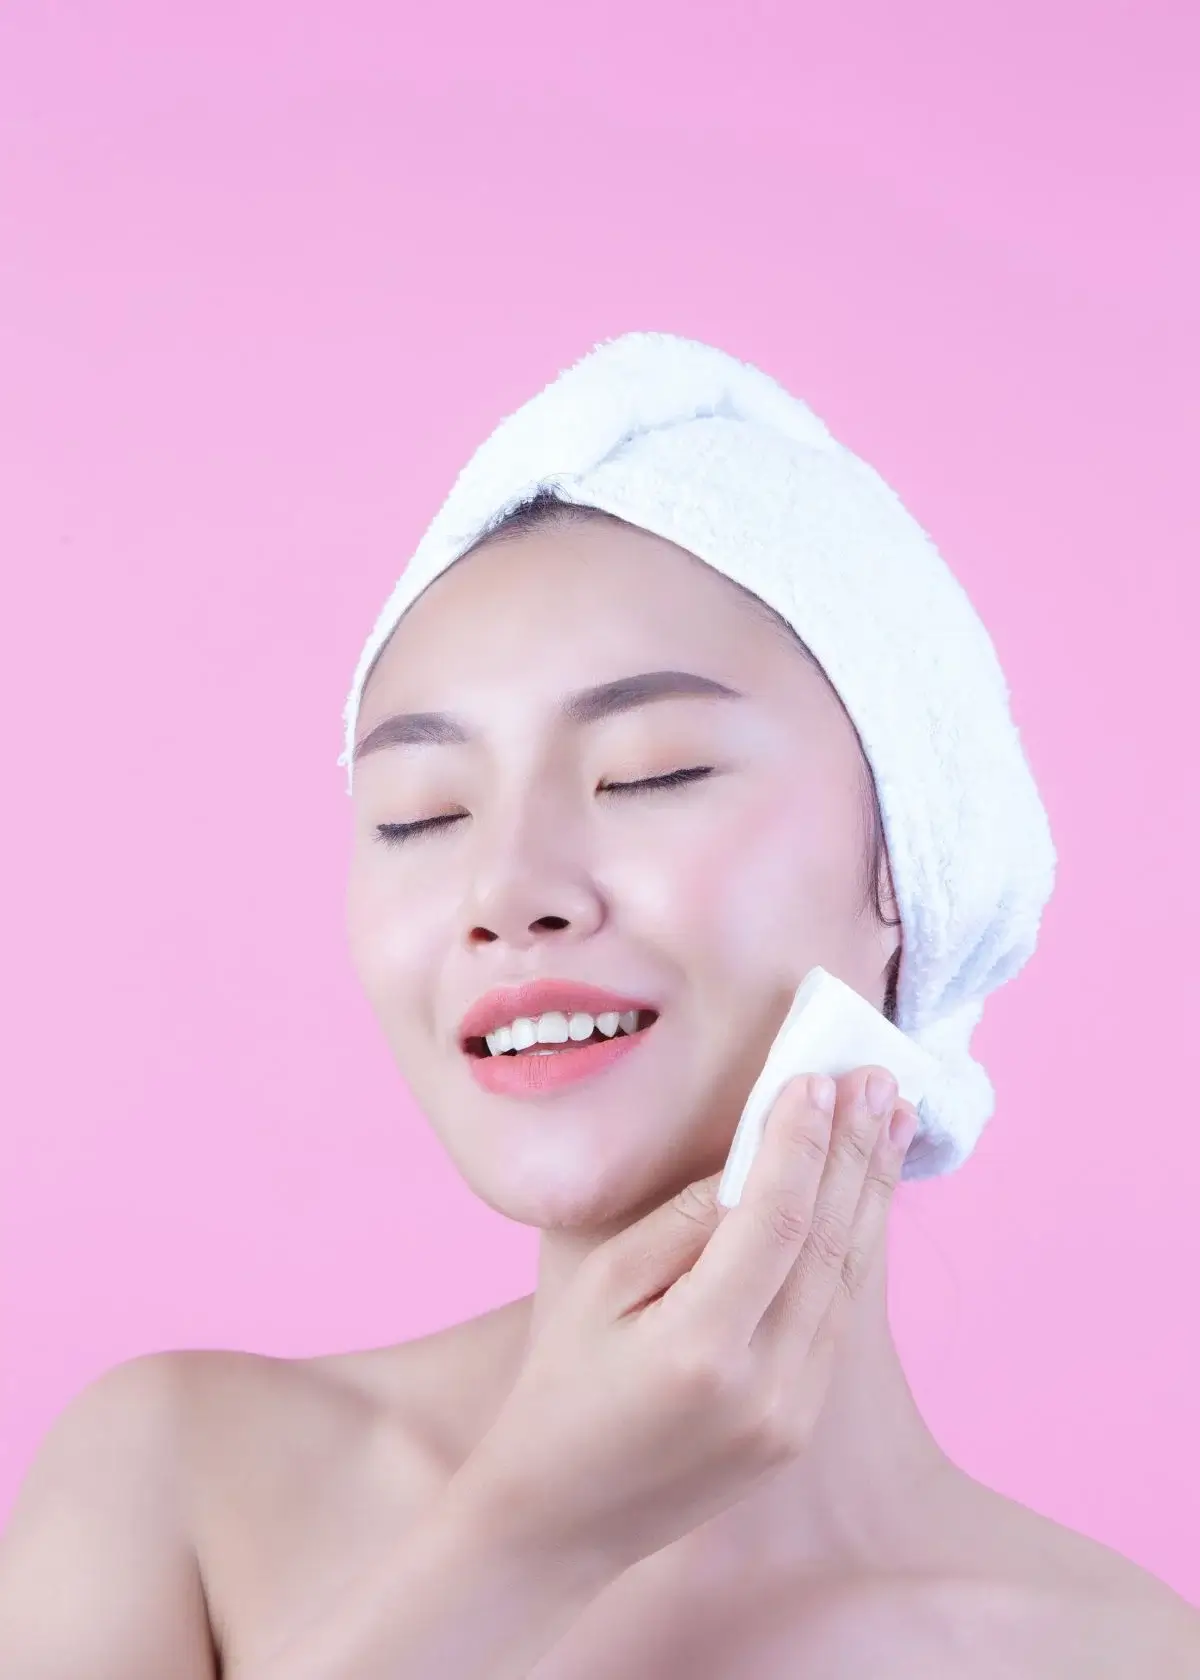 What are the benefits of using face wipes for acne?